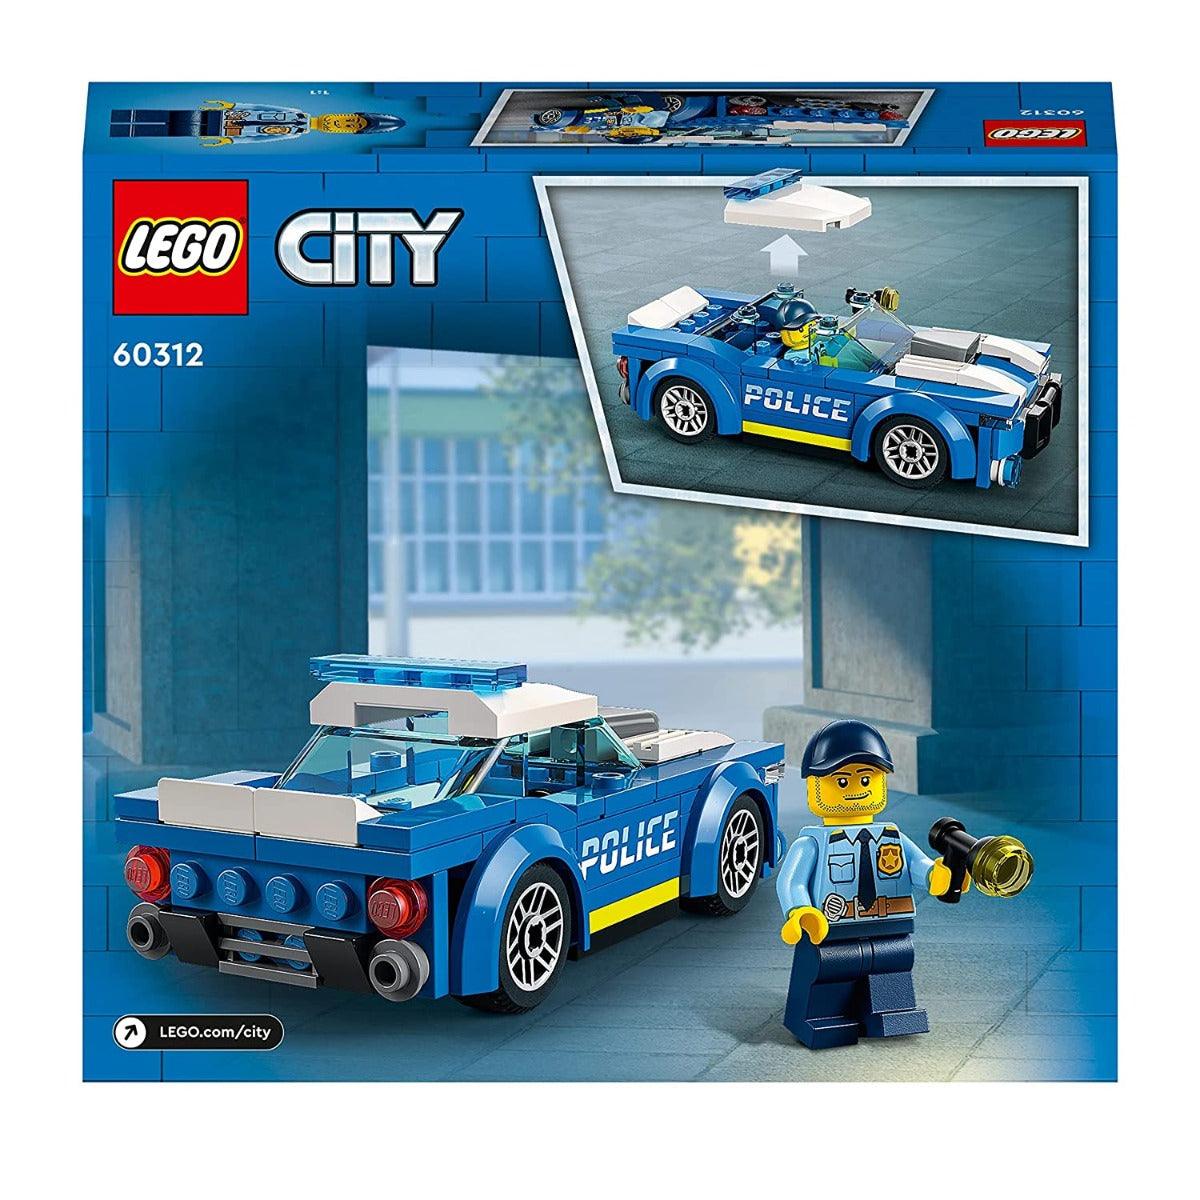 LEGO City Police Car Building Kit for Ages 5+